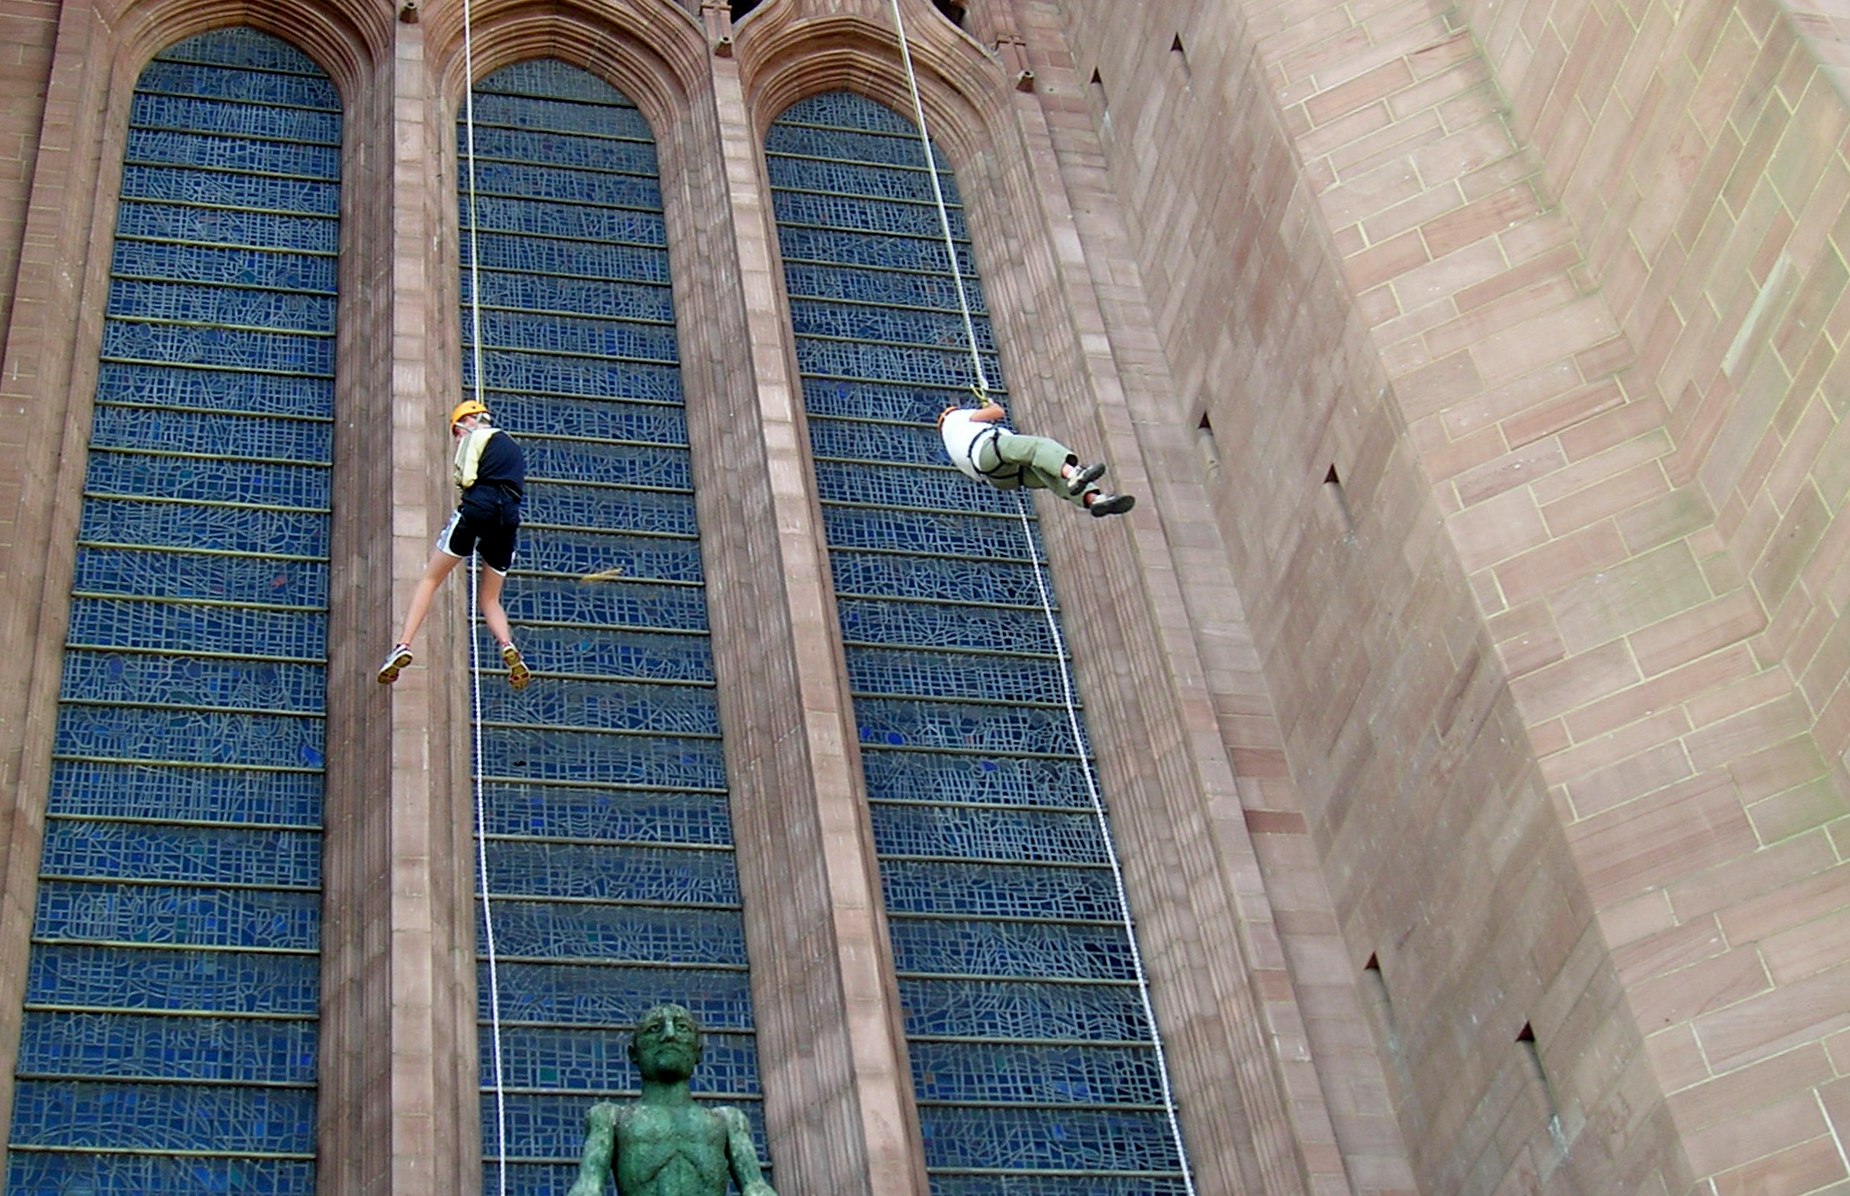 Ken Porter & his grandson Matthew Abbott abseiling down Liverpool Cathedral for Sreepur charity, Aug 2014